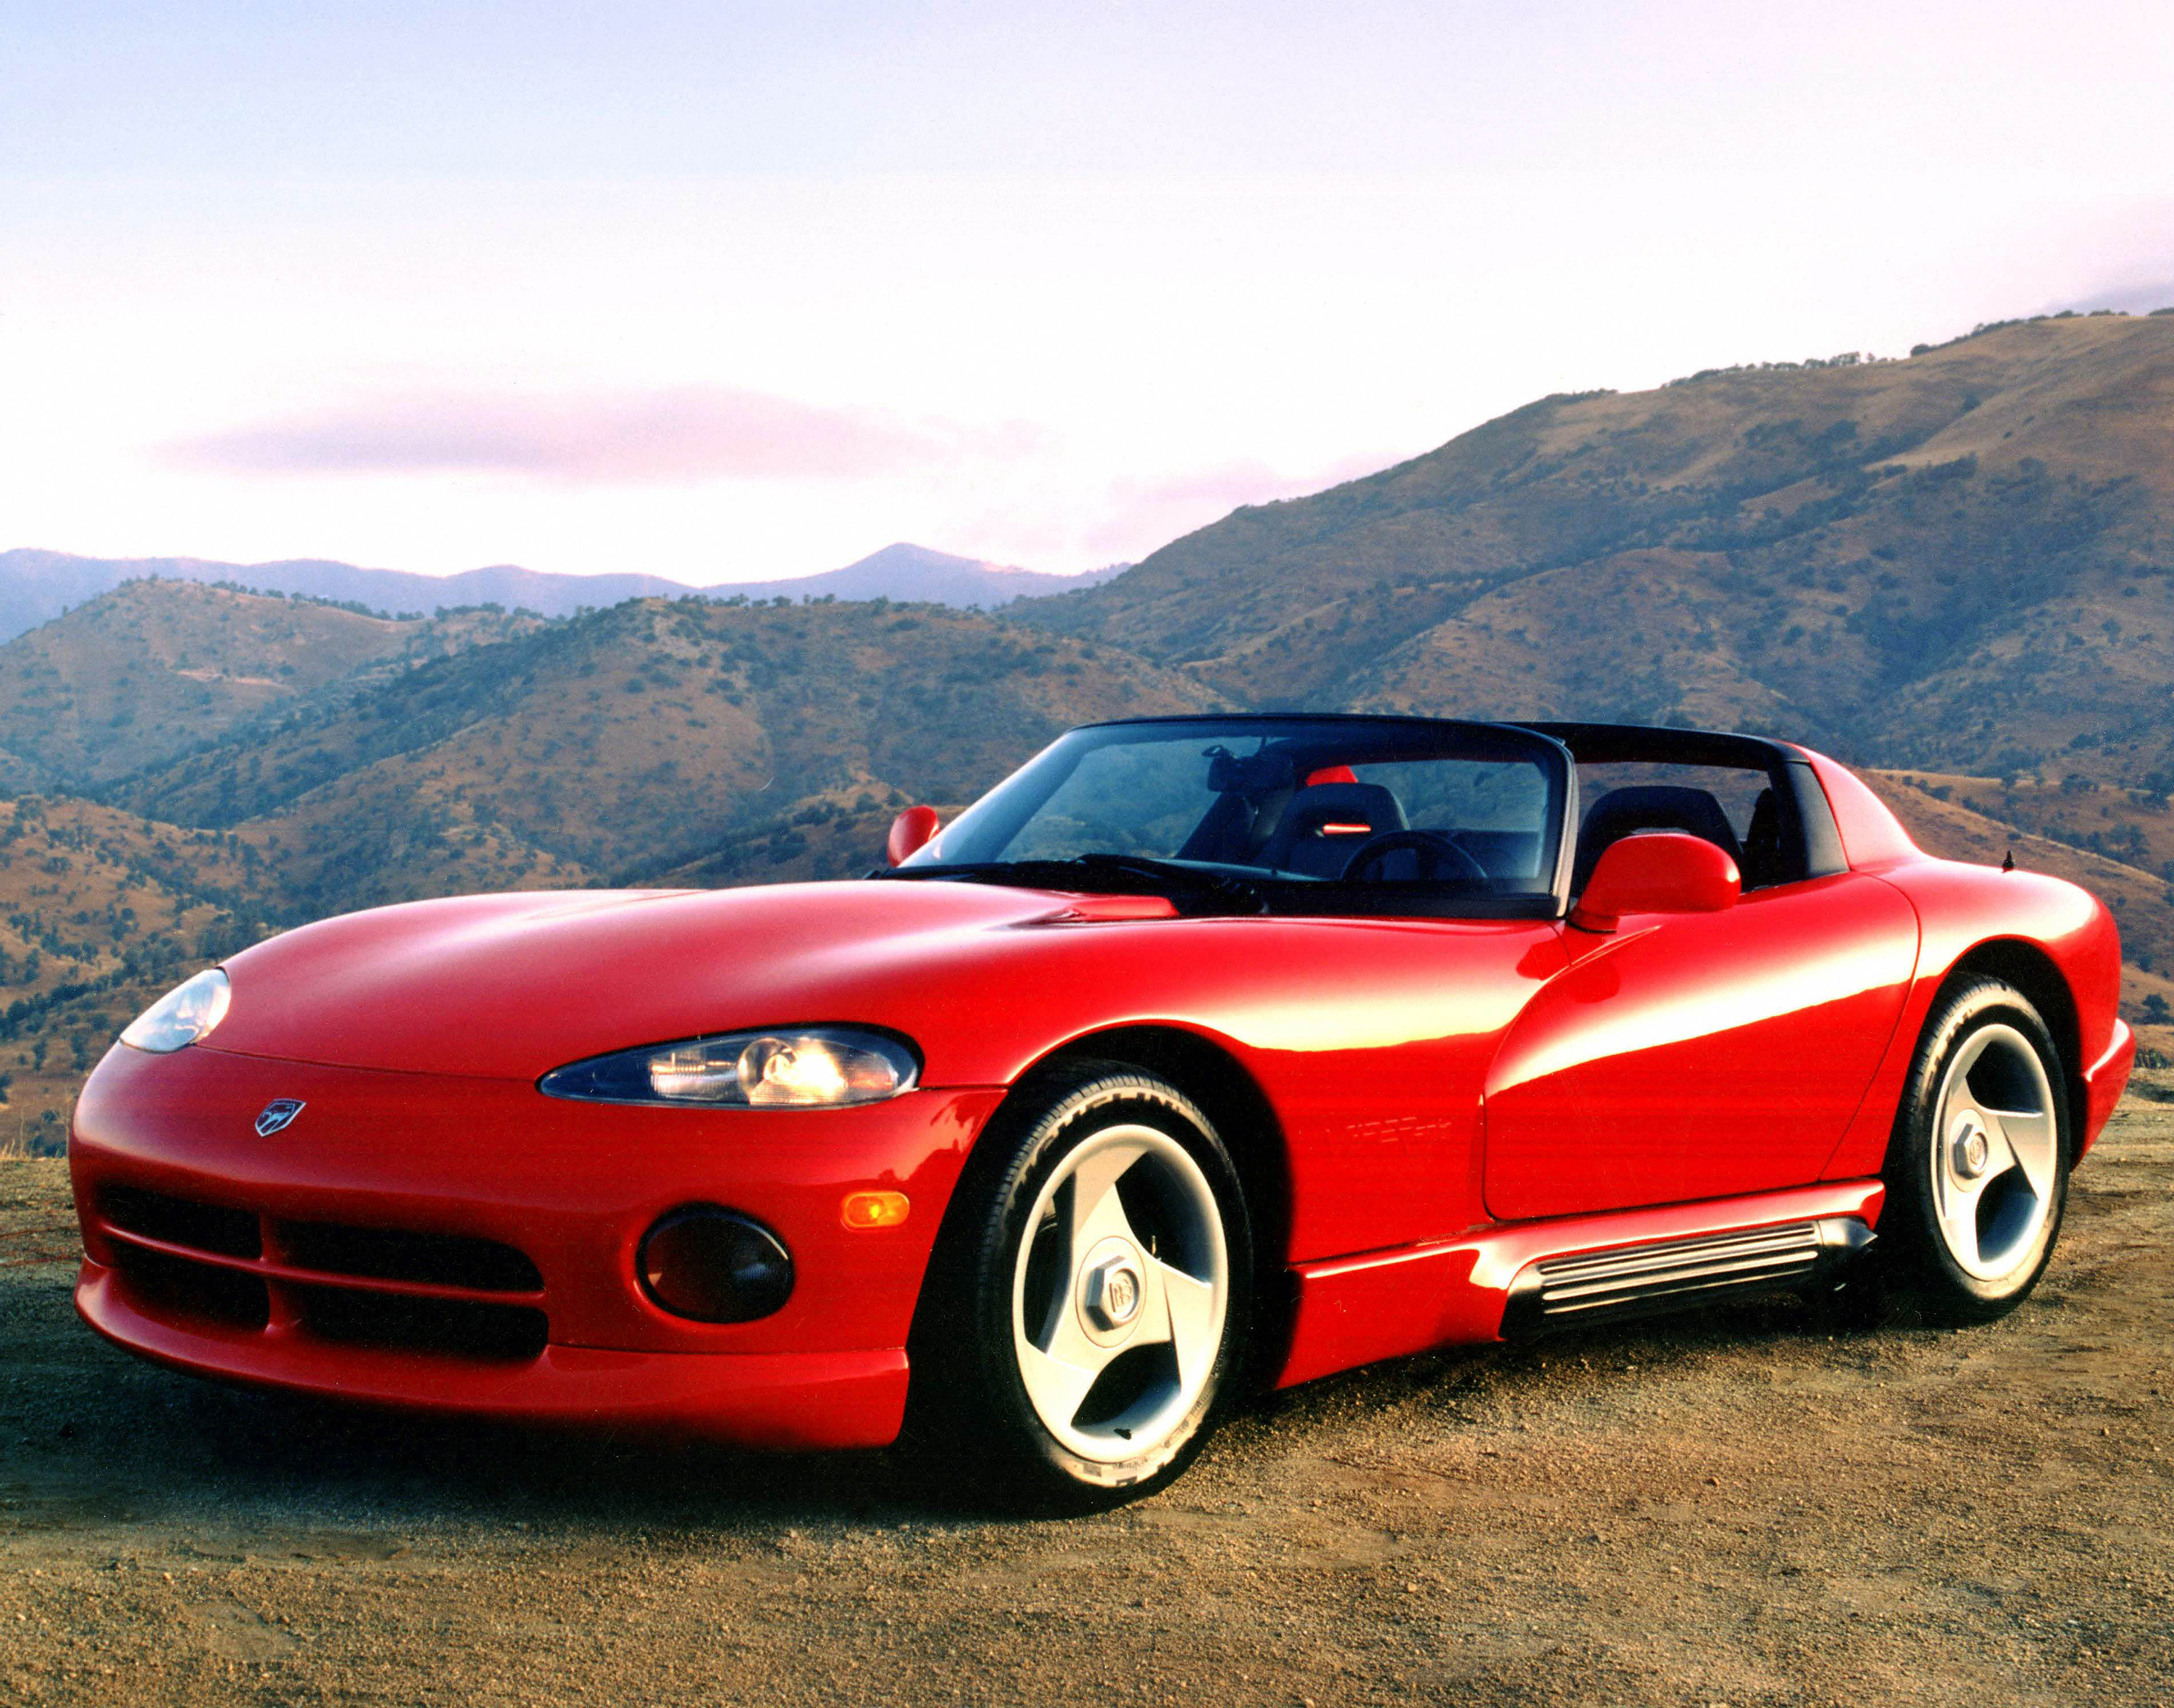 General 3000x2357 Dodge Dodge Viper red cars sports car American cars Stellantis frontal view vehicle sunlight grass car mountains